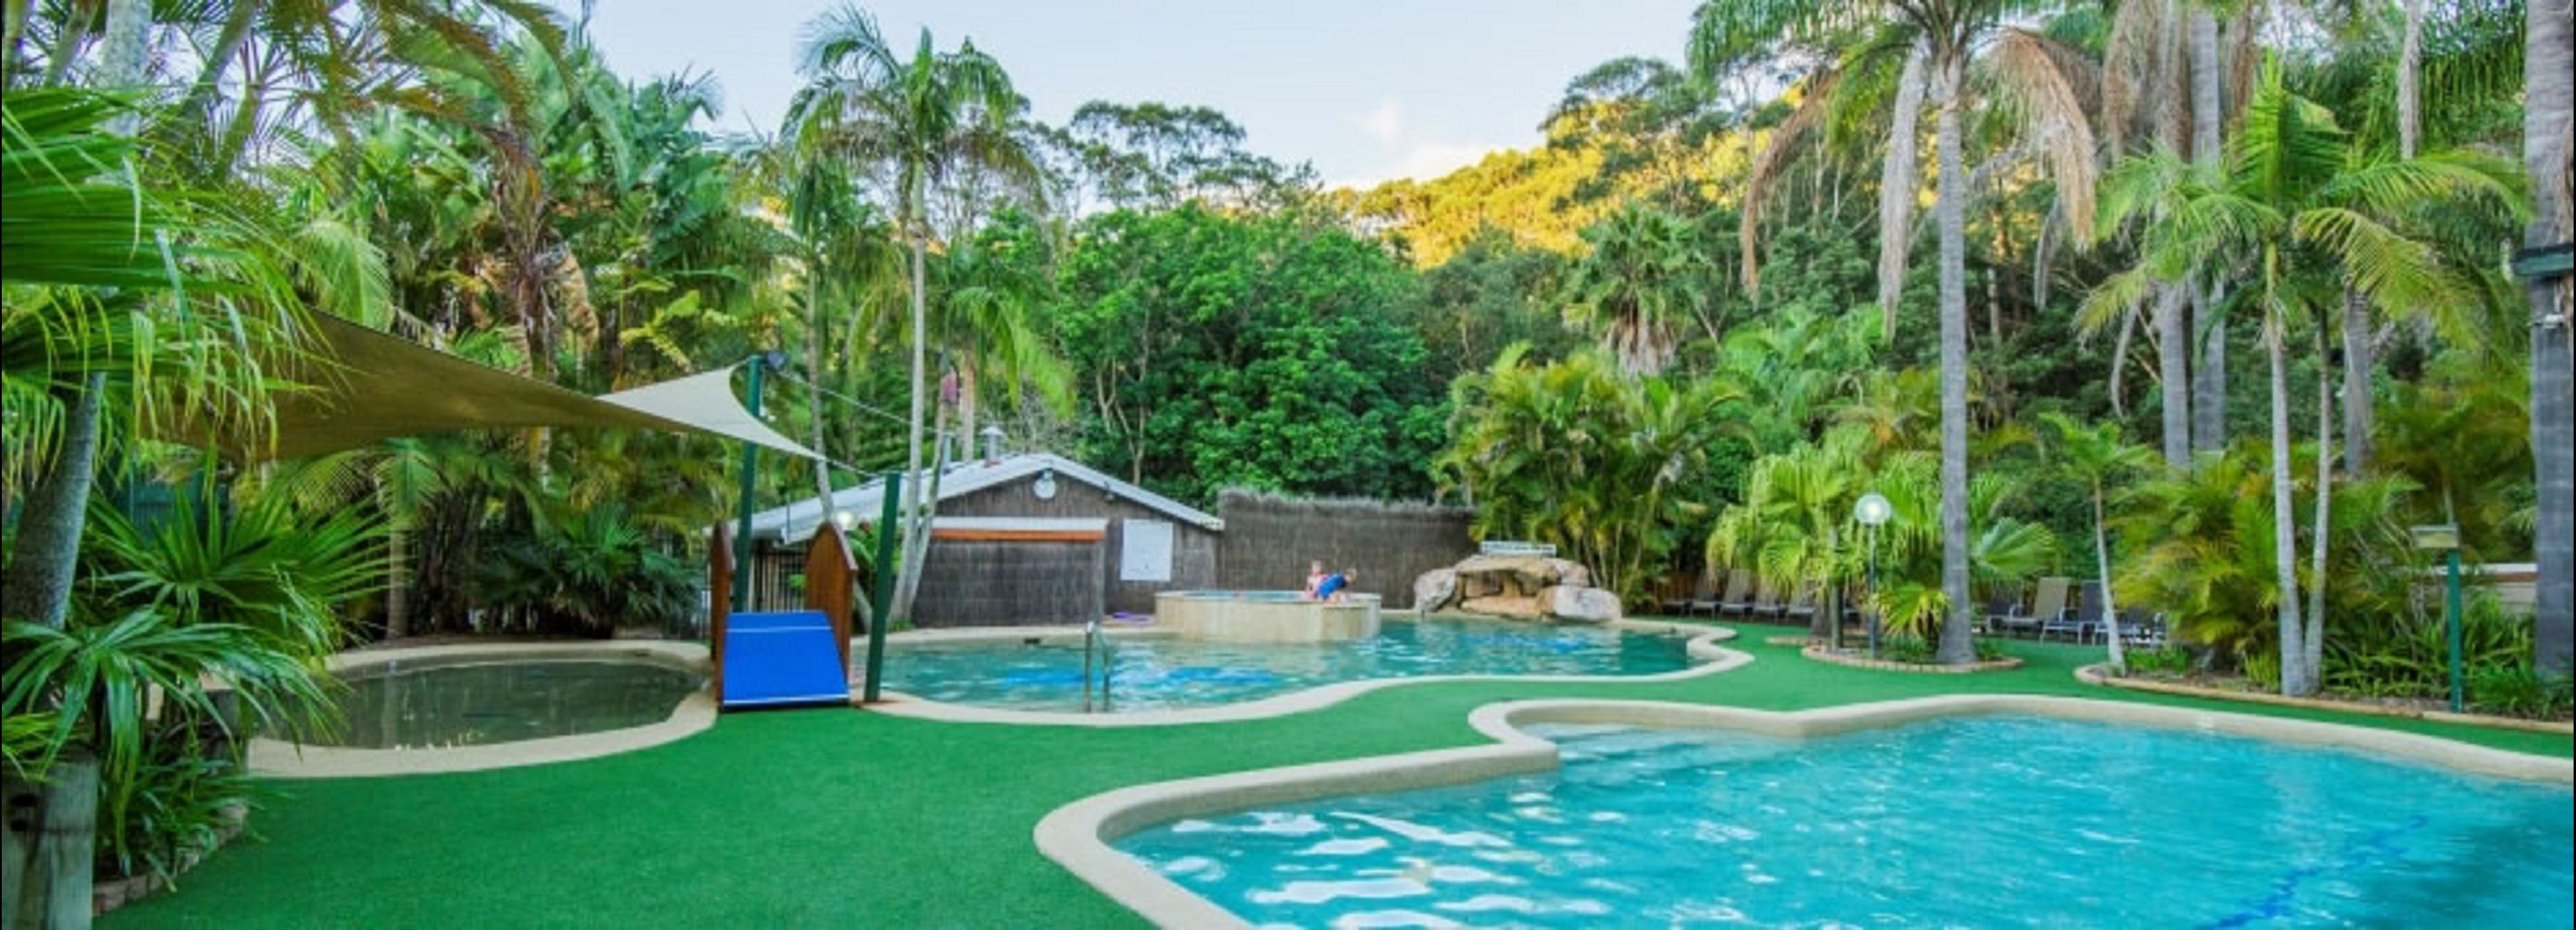 The Palms at Avoca - Accommodation Bookings